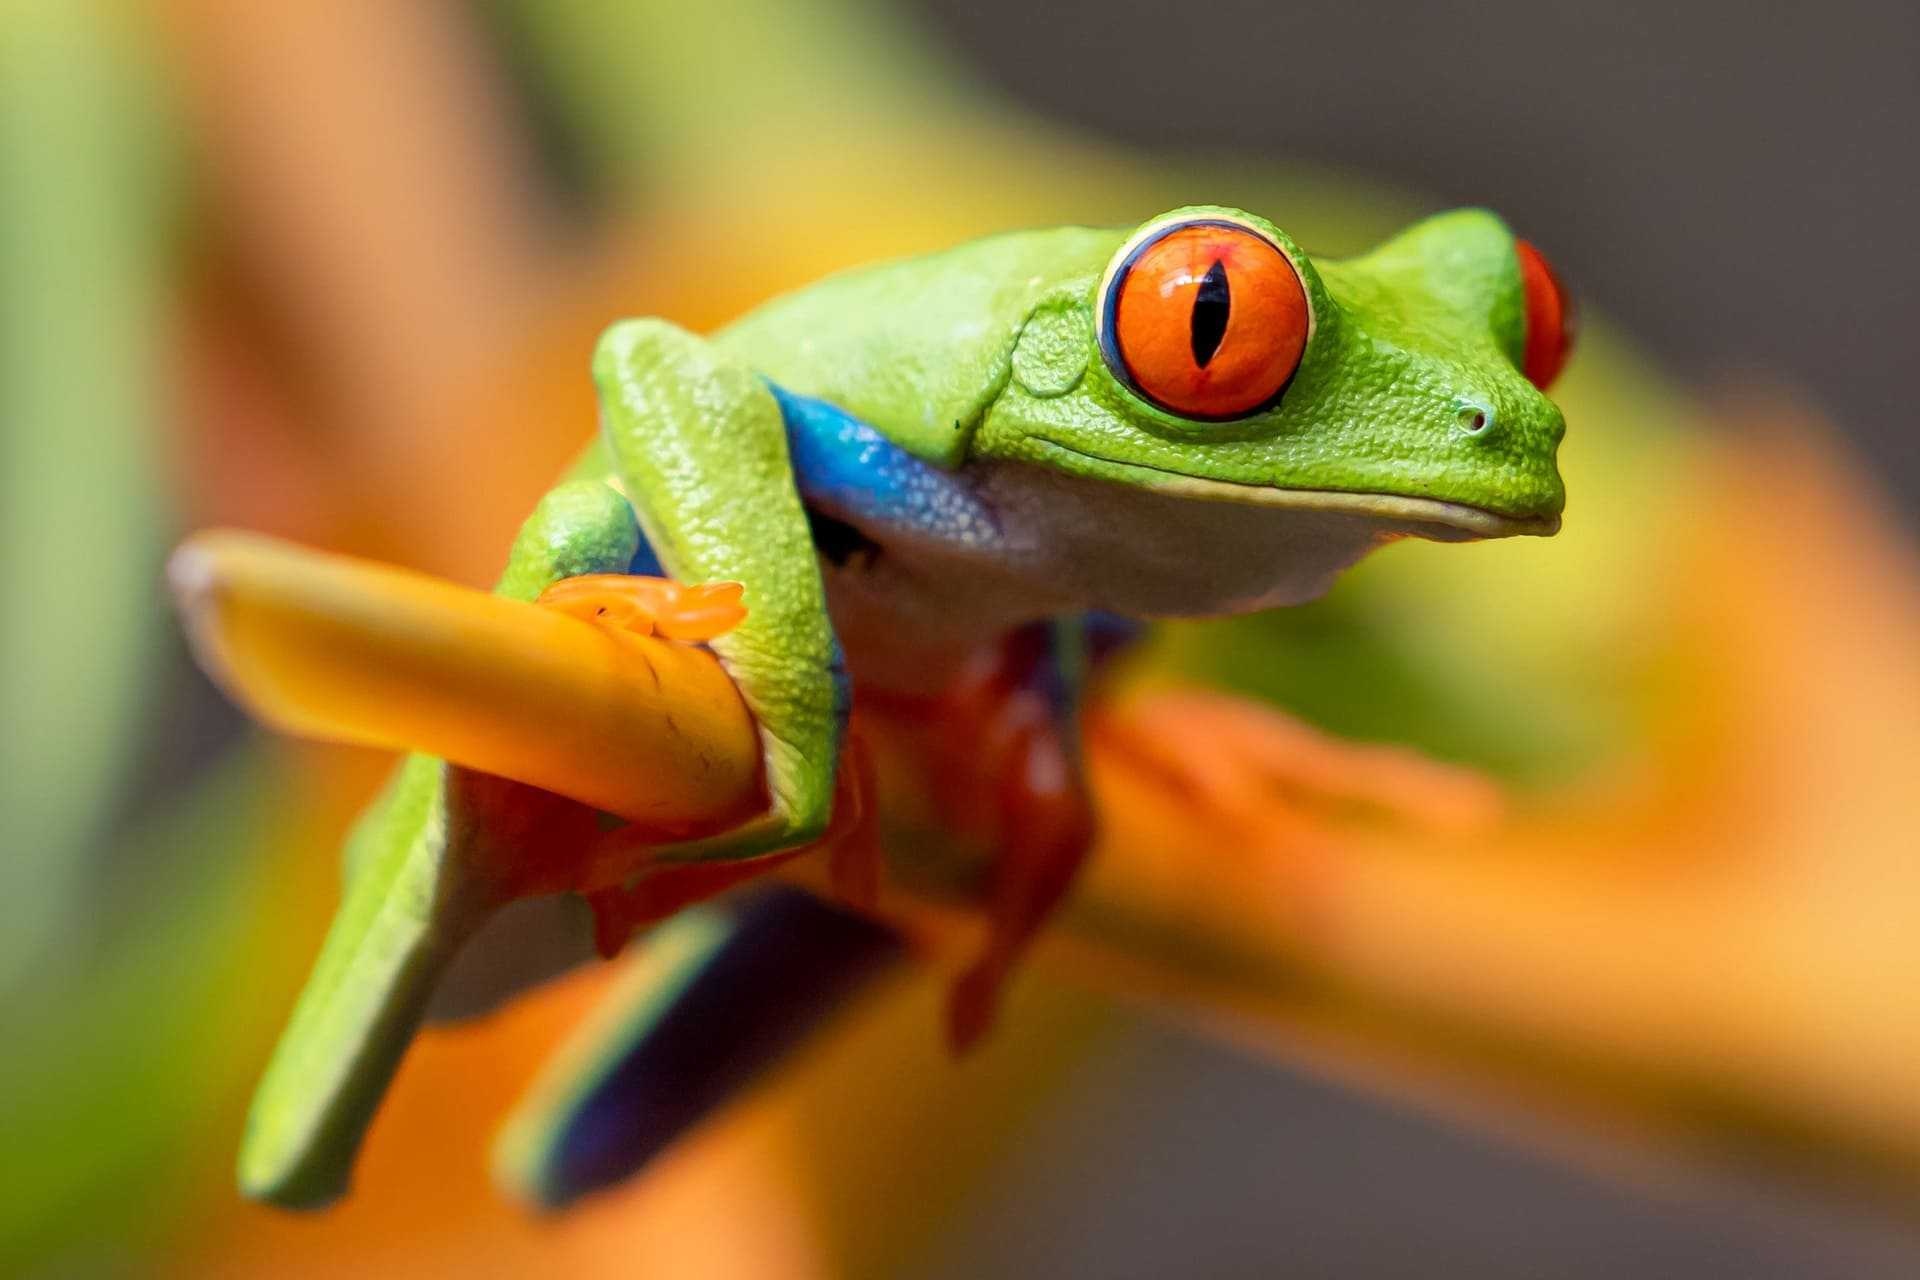 Frog wallpapers, Animal backgrounds, Wallpaper collection, Nature-themed, 1920x1280 HD Desktop